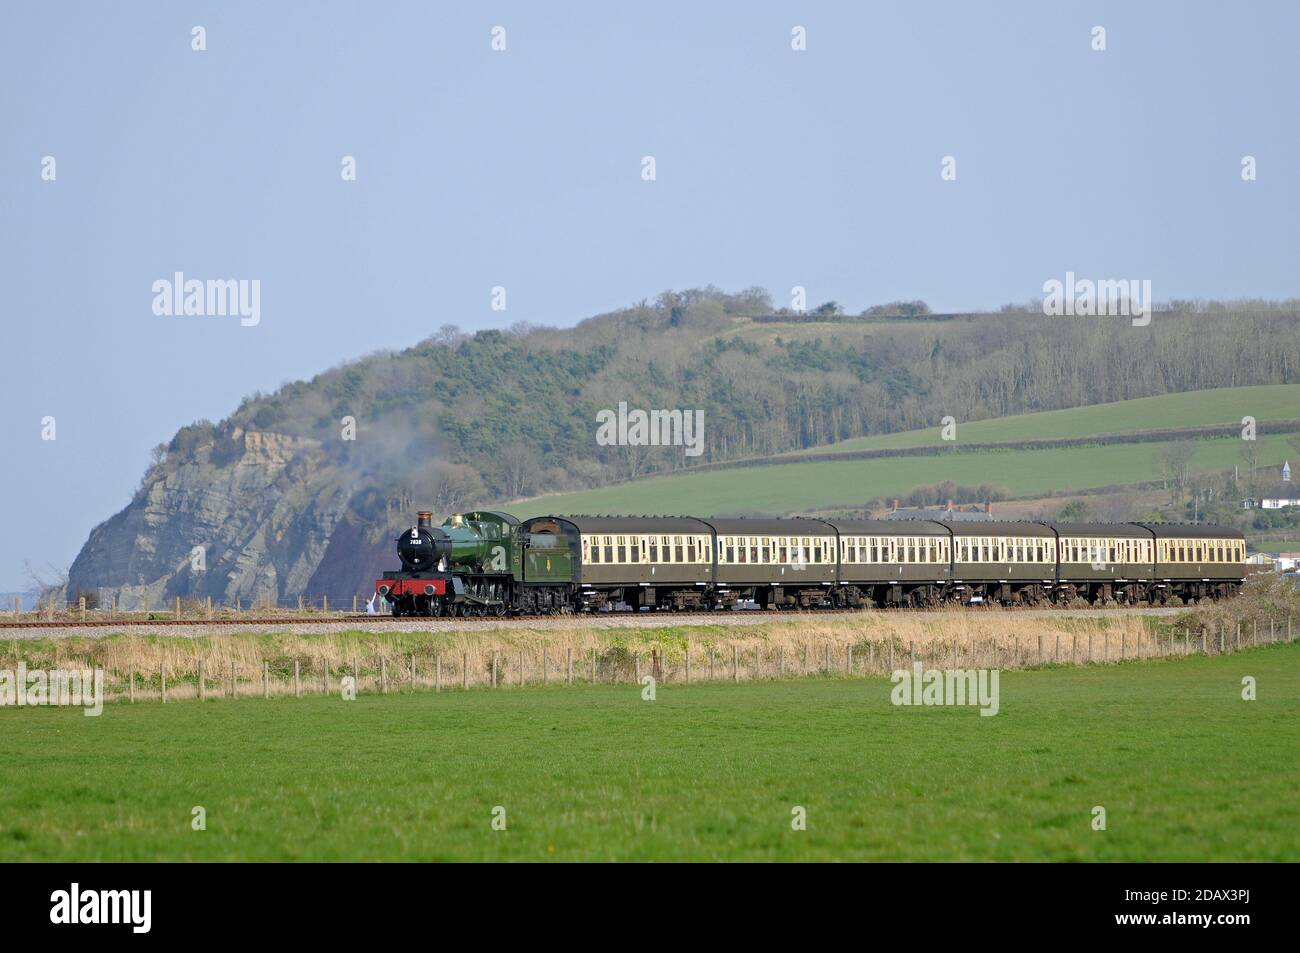 'Odney Manor' leaves Blue Anchor with a Bishops Lydeard - Minehead service. Stock Photo